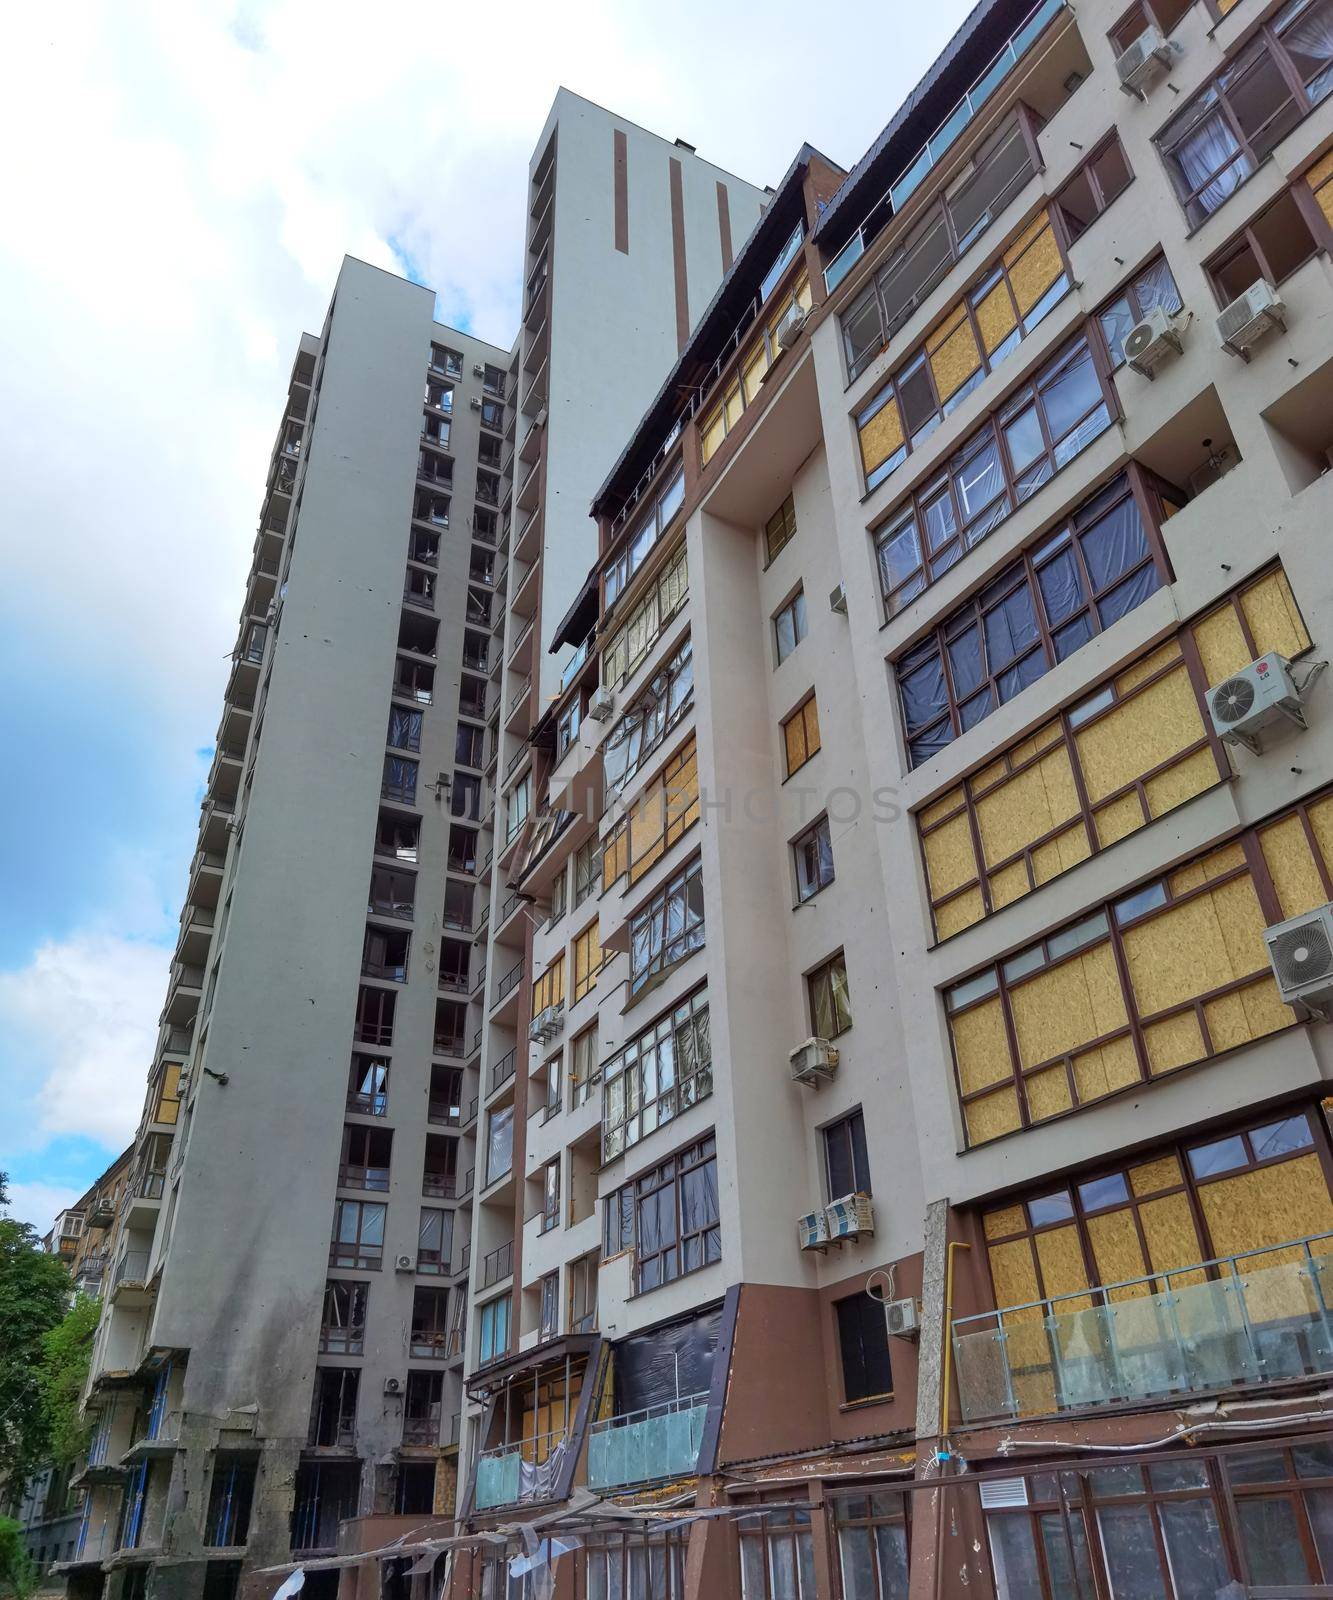 Kyiv, Ukraine - July 10, 2022: A residential building damaged by an russuian rocket in the Kyiv. The rocket hit the house.